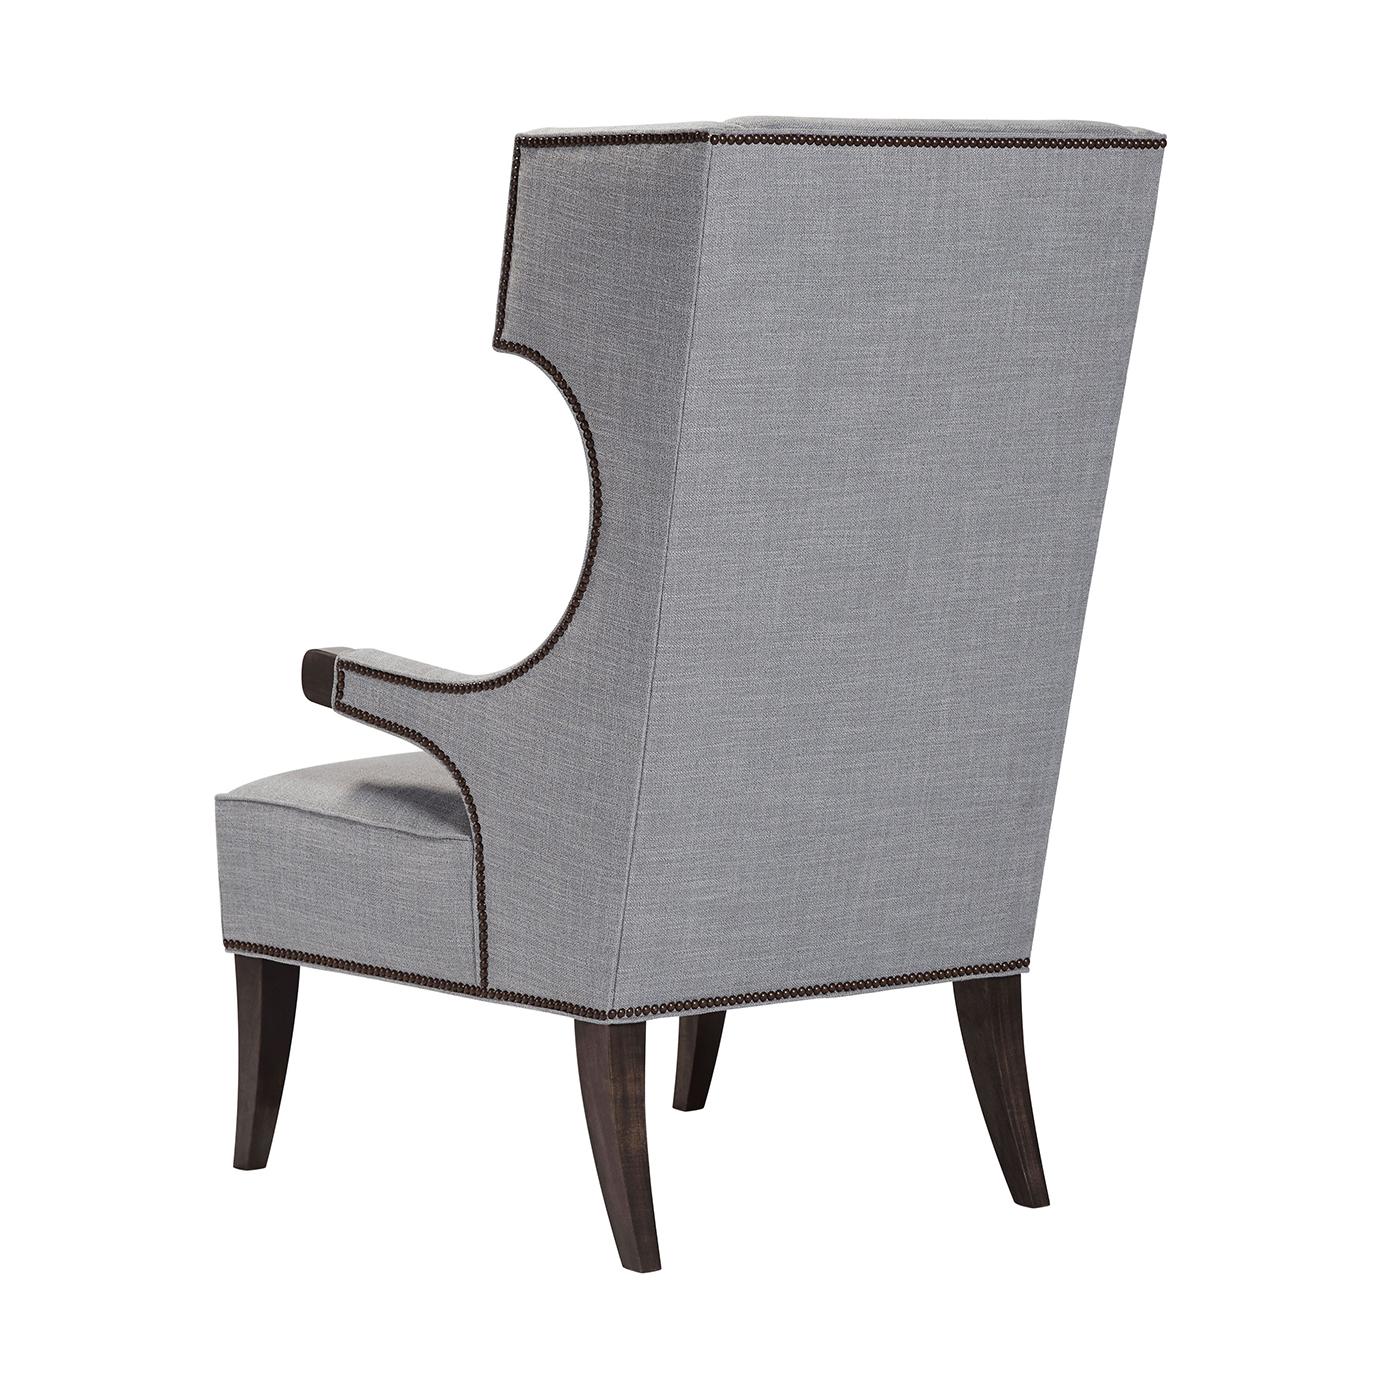 A midcentury style wingchair with an upholstered cushion, a tight angled winged backrest with down swept arms and exposed show wood ends, on tapered sabre legs and finished with nailhead trim details.
Dimensions: 31